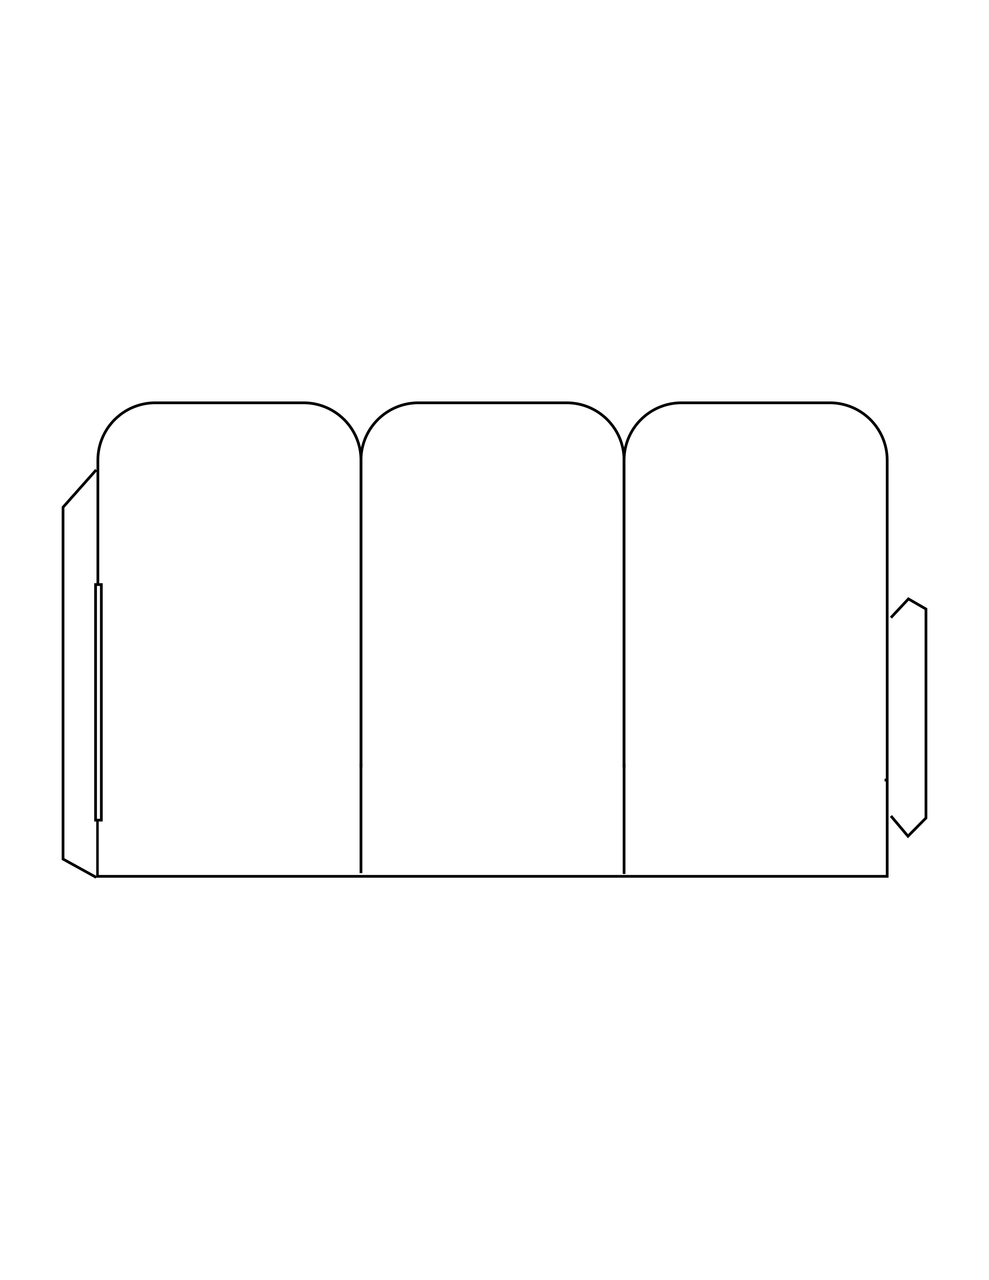 Item 23: 23-Up Round Edge Tri-Fold Table Tent Cards (23 Sheets) For Tri Fold Tent Card Template